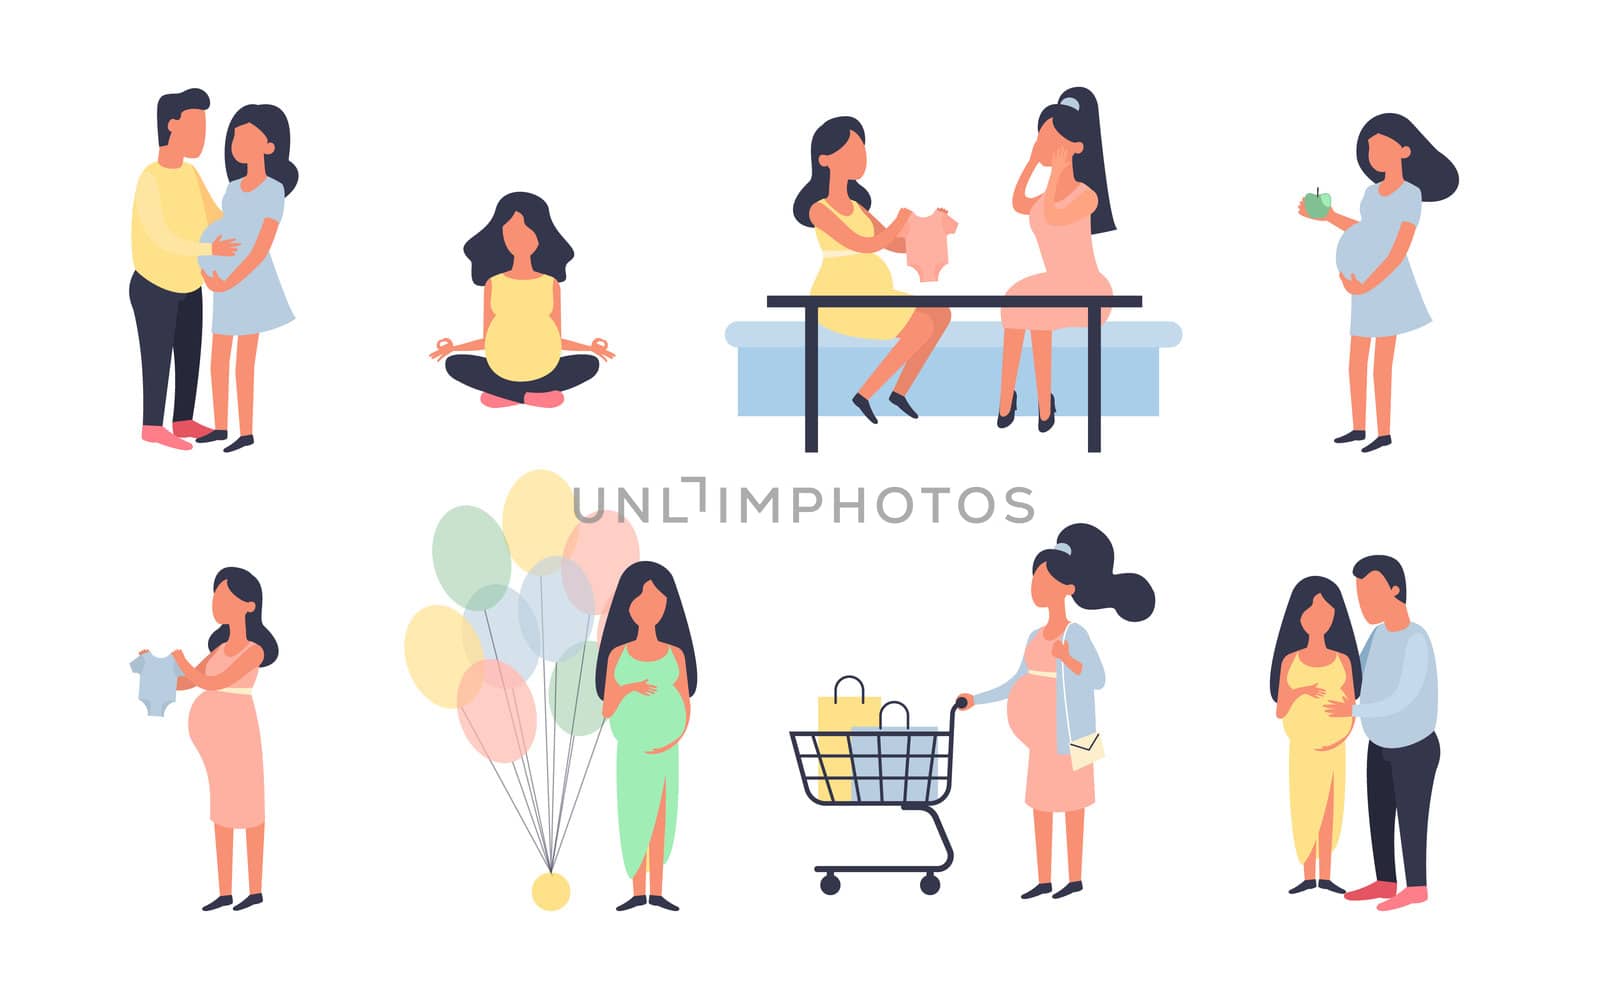 Pregnant woman. Pregnancy illustration set. Walking, healthy nutrition during pregnancy, purchase, baby shower and other situations. Character design. Daily activities, shopping.